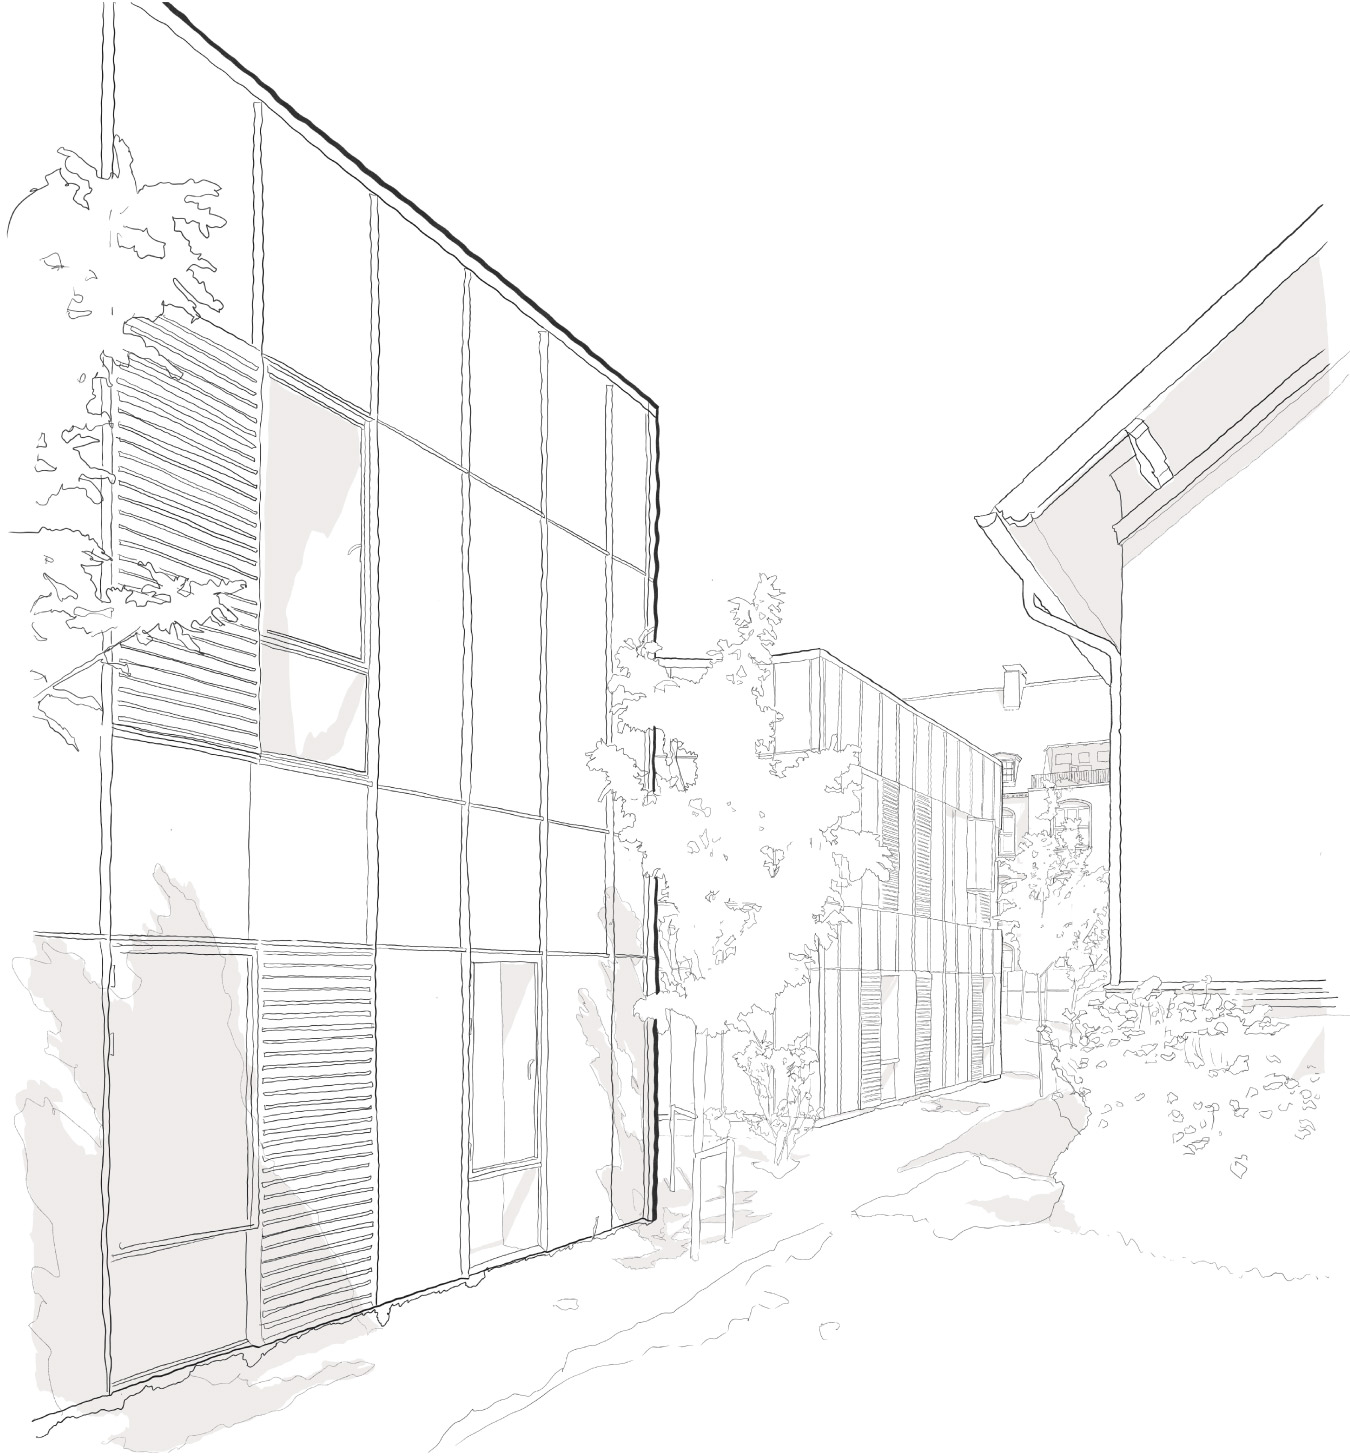 'Moment drawing' - Urban Hospice by NORD Architects